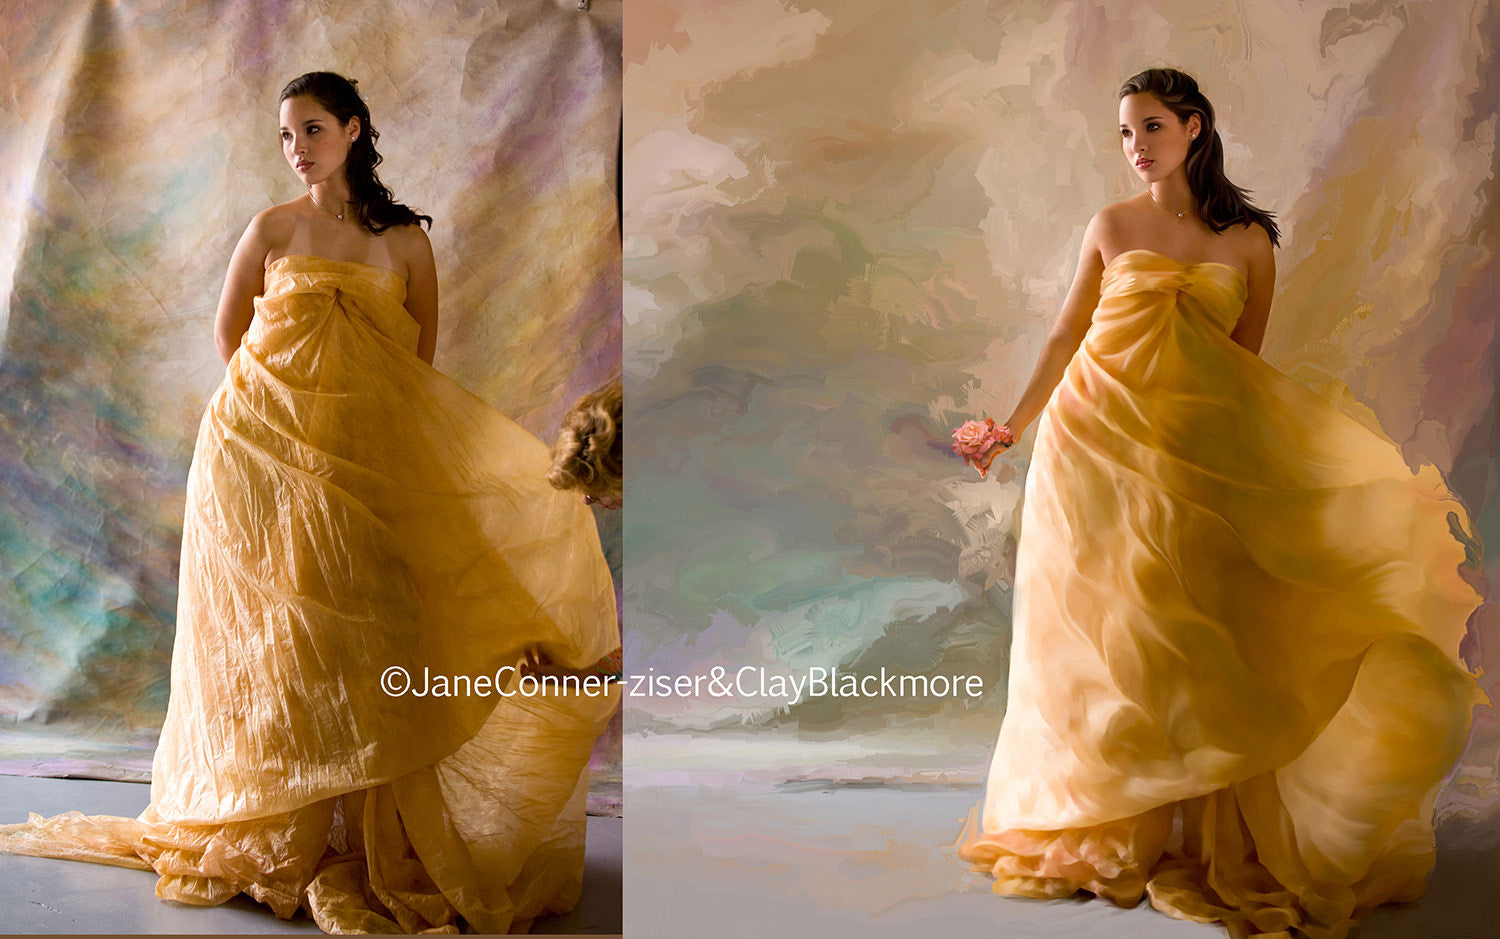 Original picture of a woman in a yellow dress vs a digital version